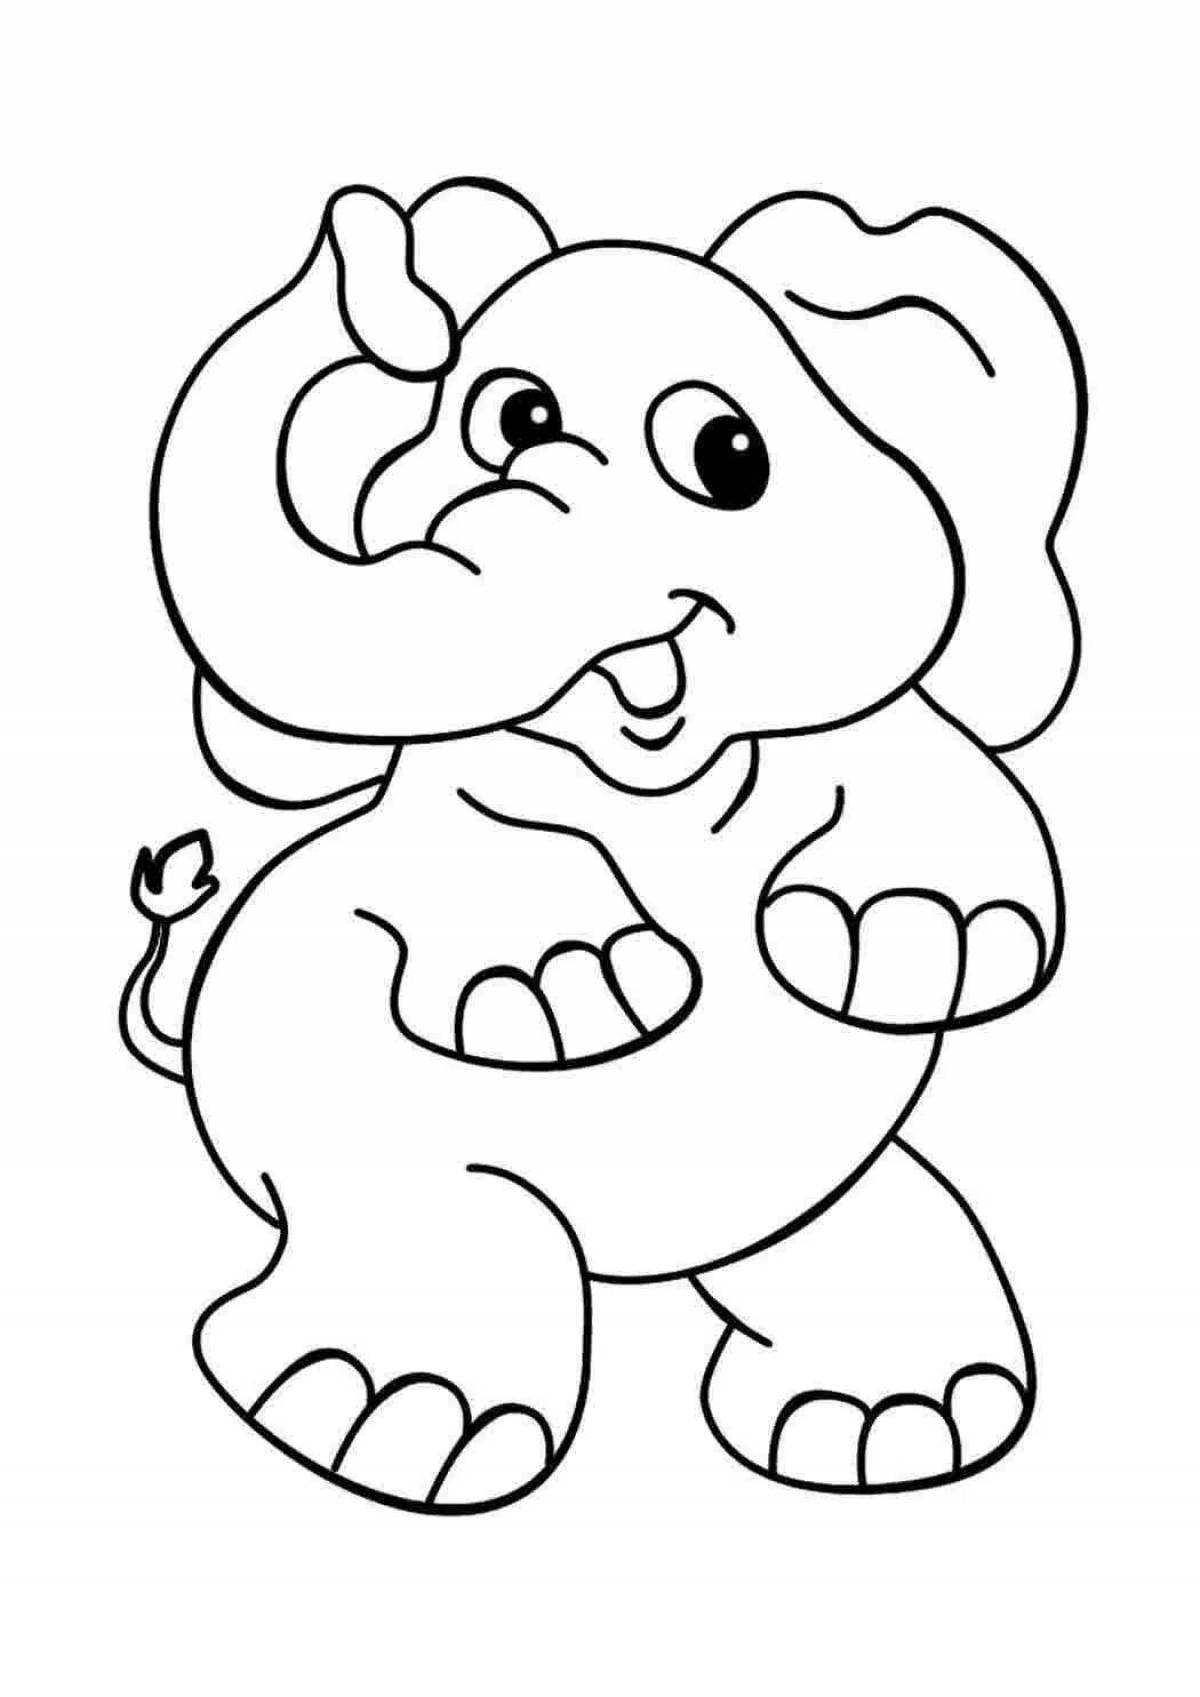 African animals coloring book for children